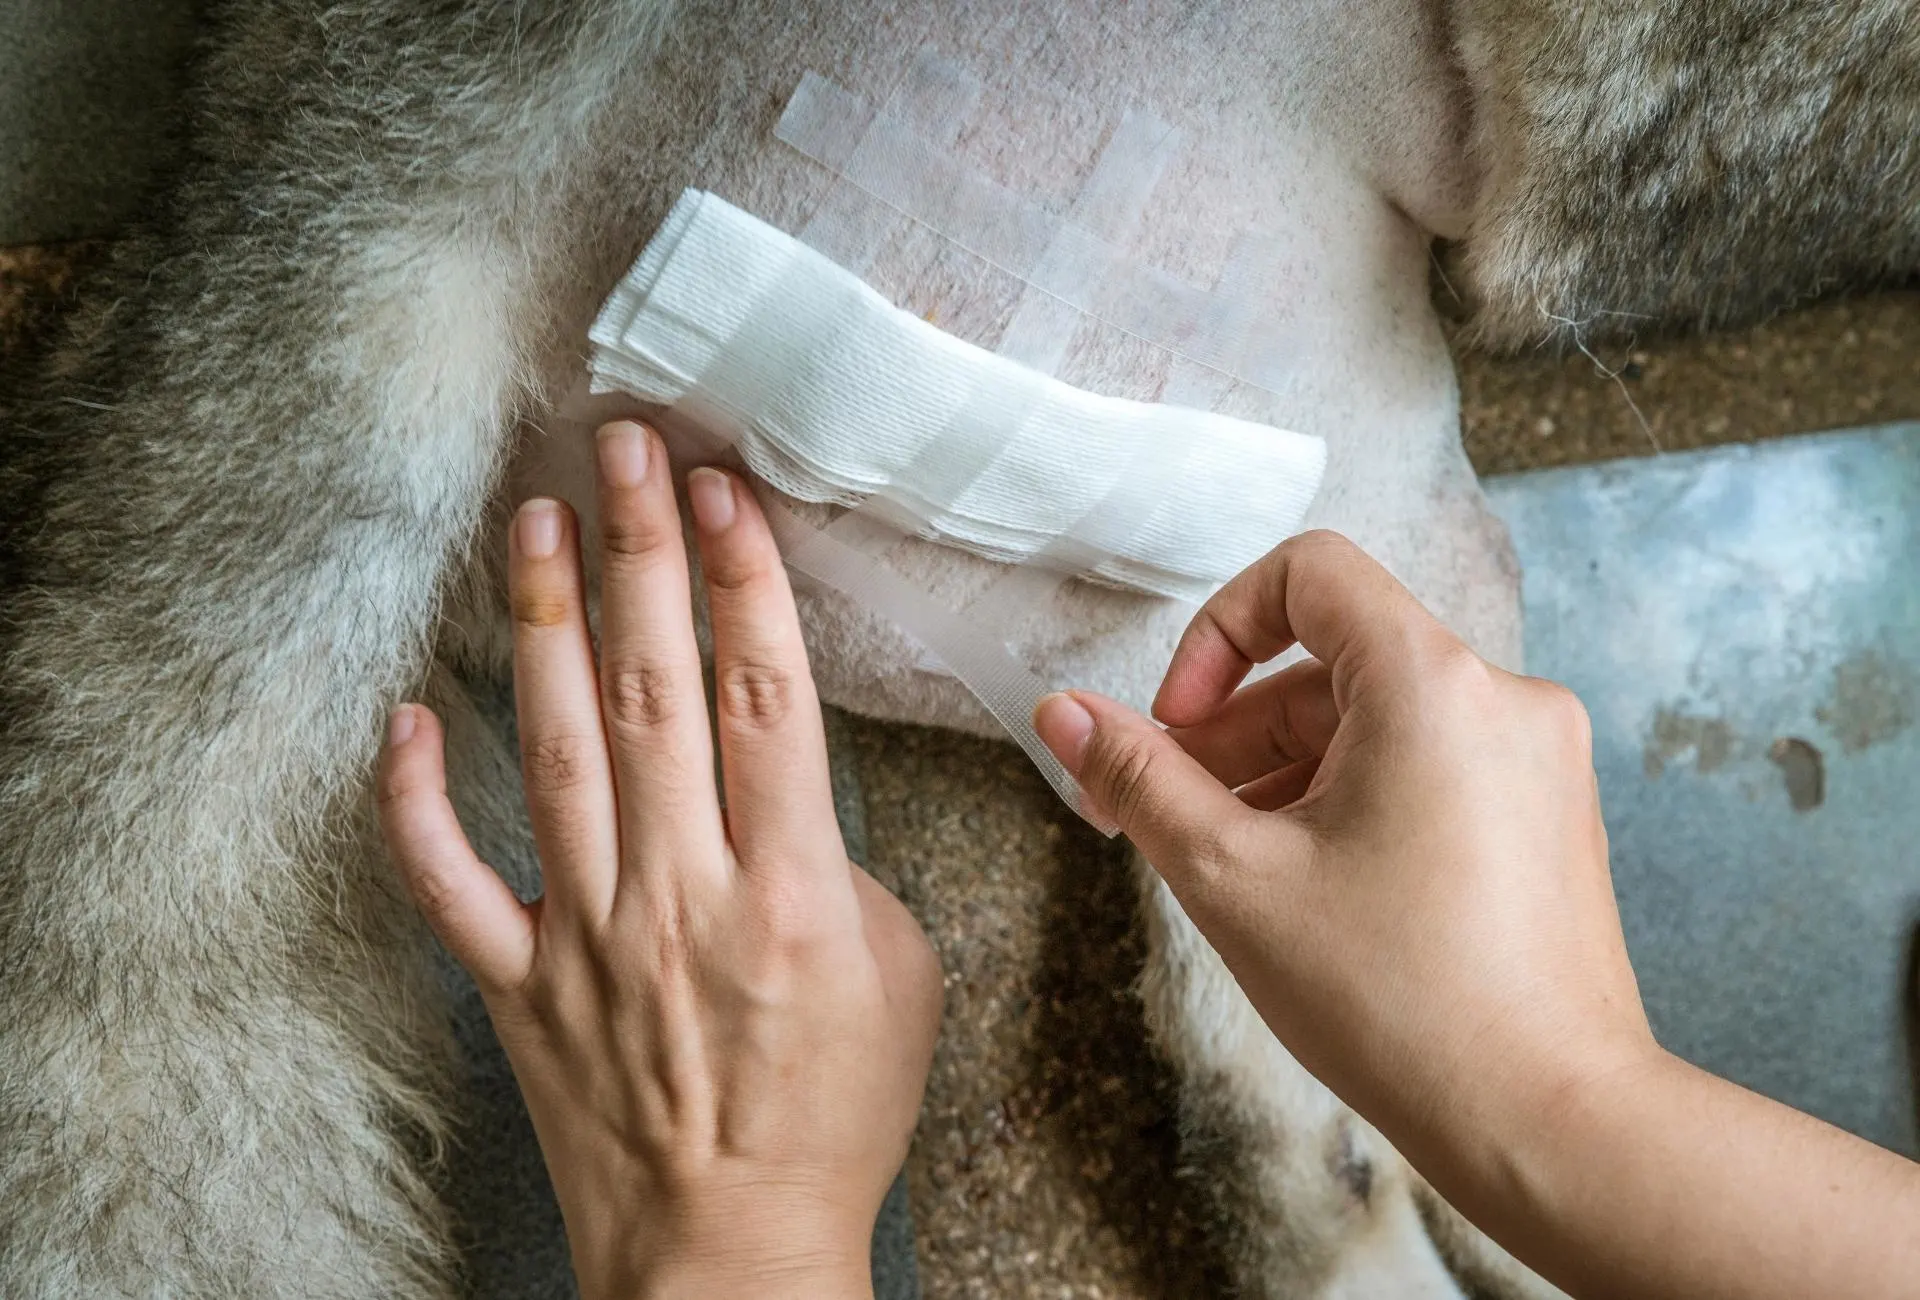 Gauze taped to a dog